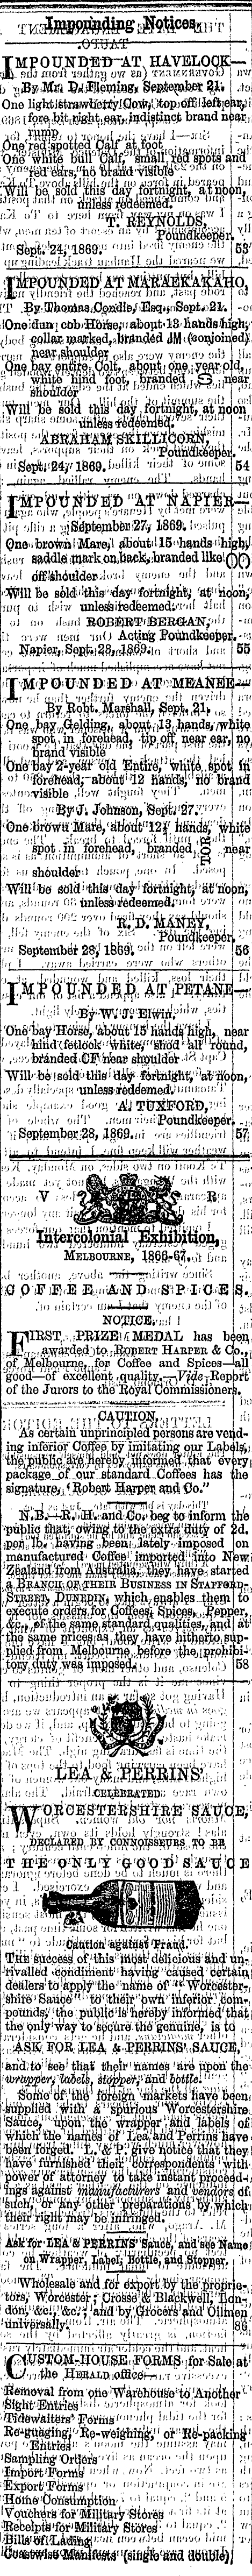 Papers Past Newspapers Hawke S Bay Herald 5 October 1869 Page 4 Advertisements Column 2